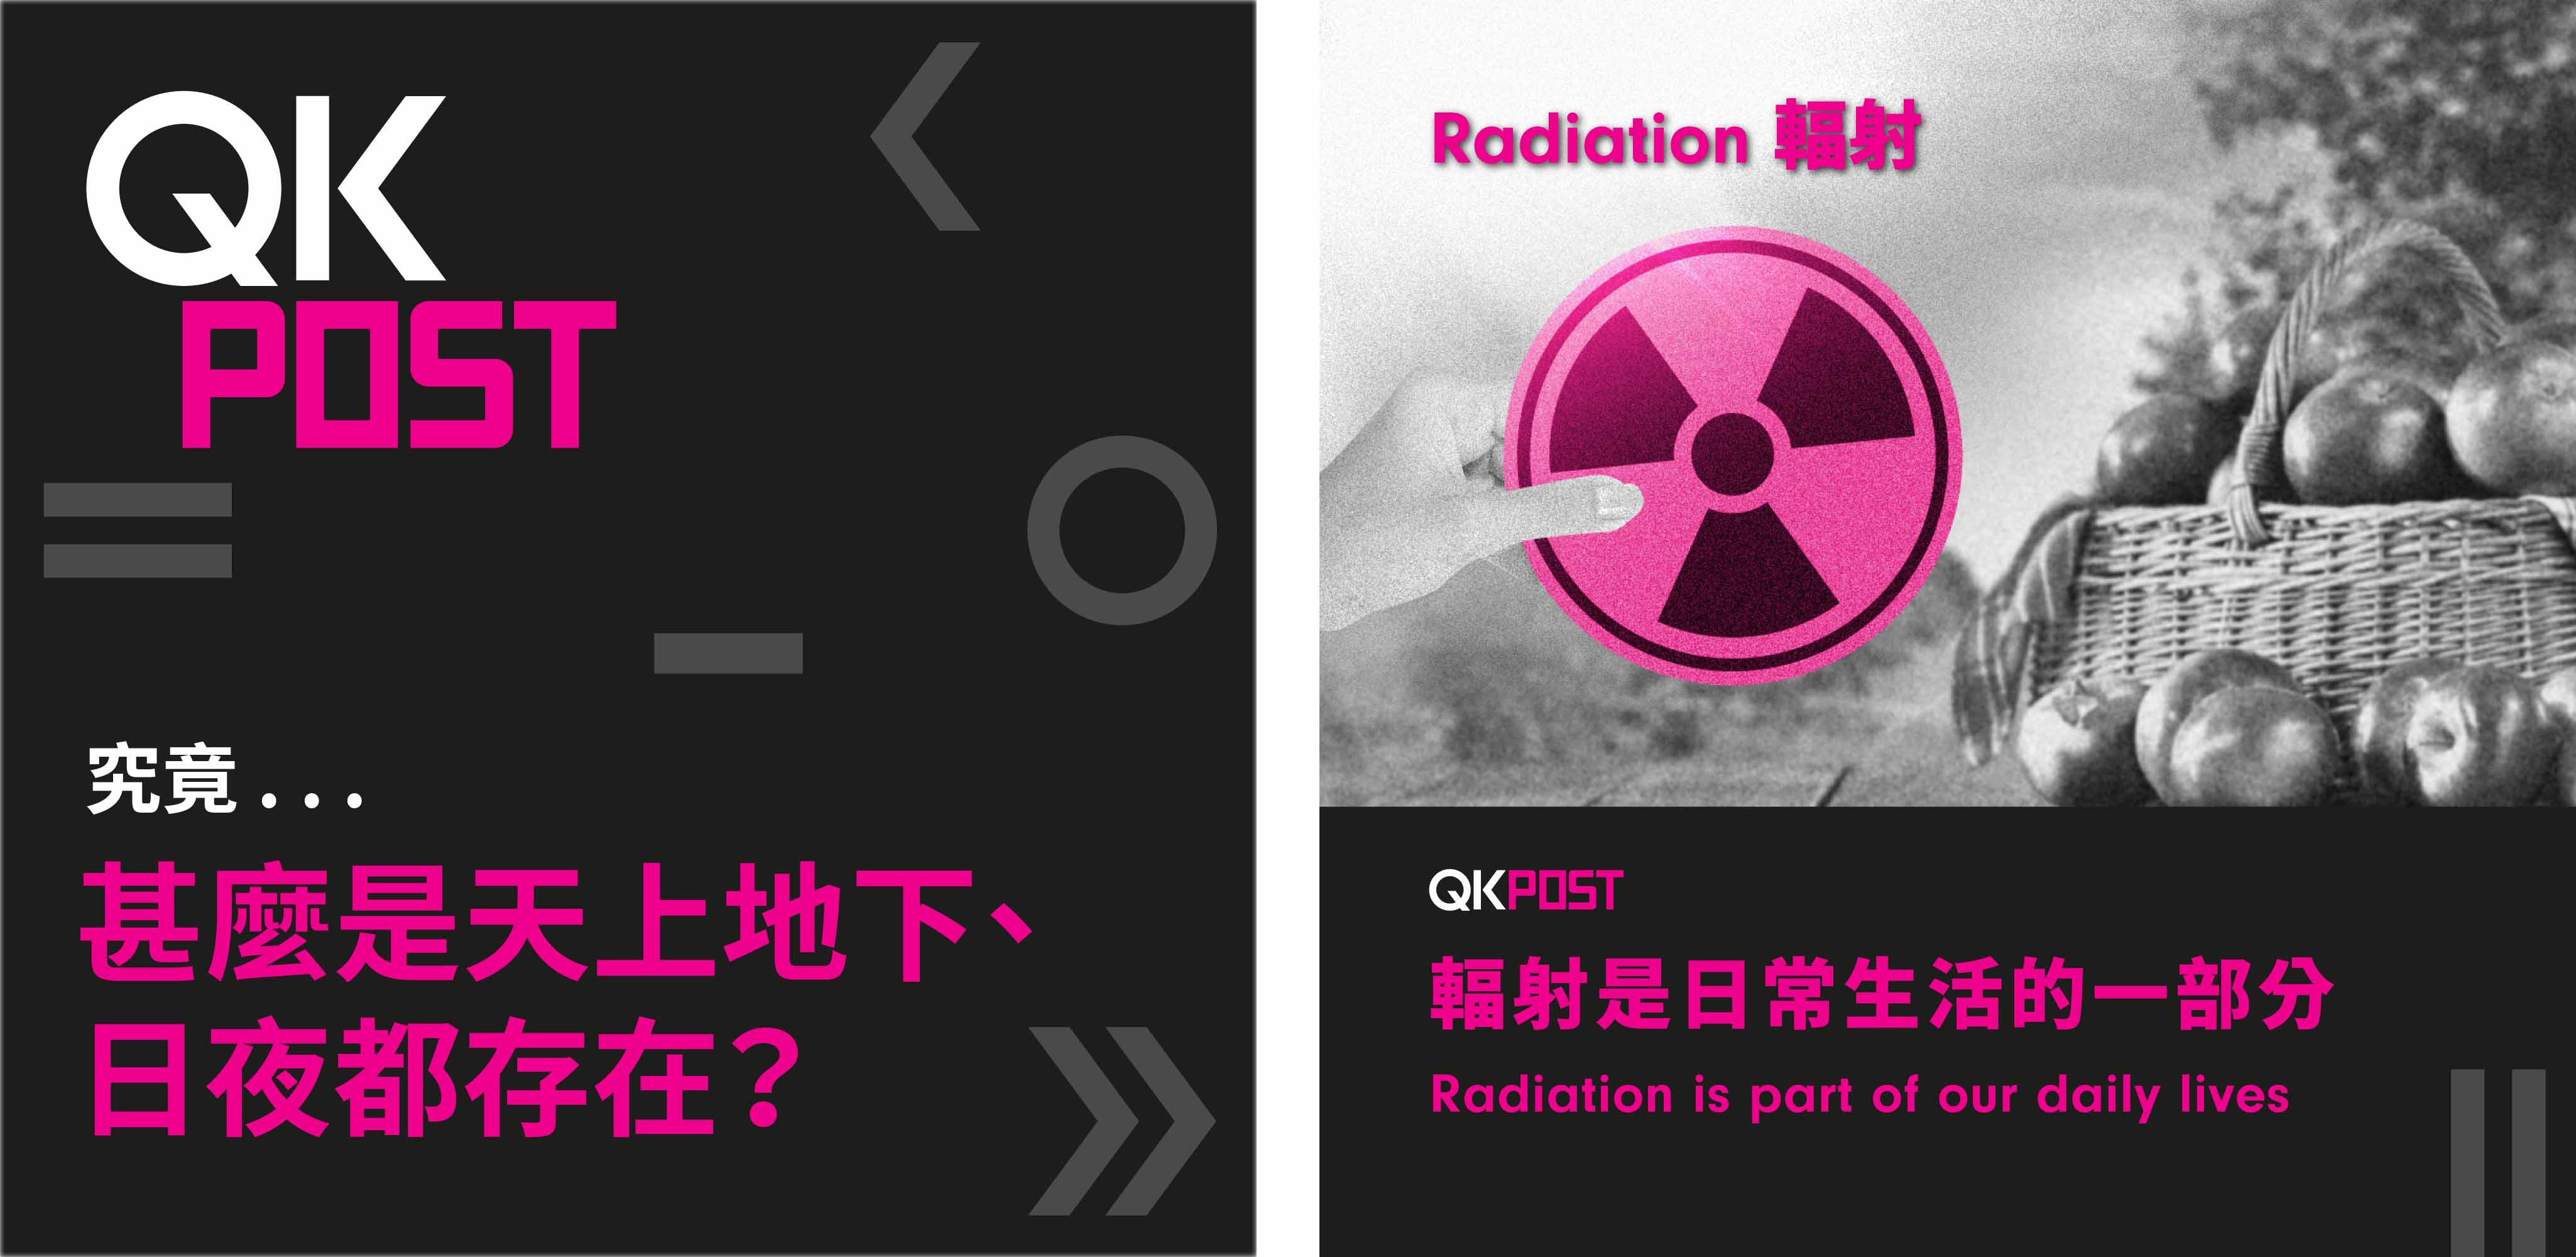 QKPOST: Science Vocabulary A to Z - R for Radiation